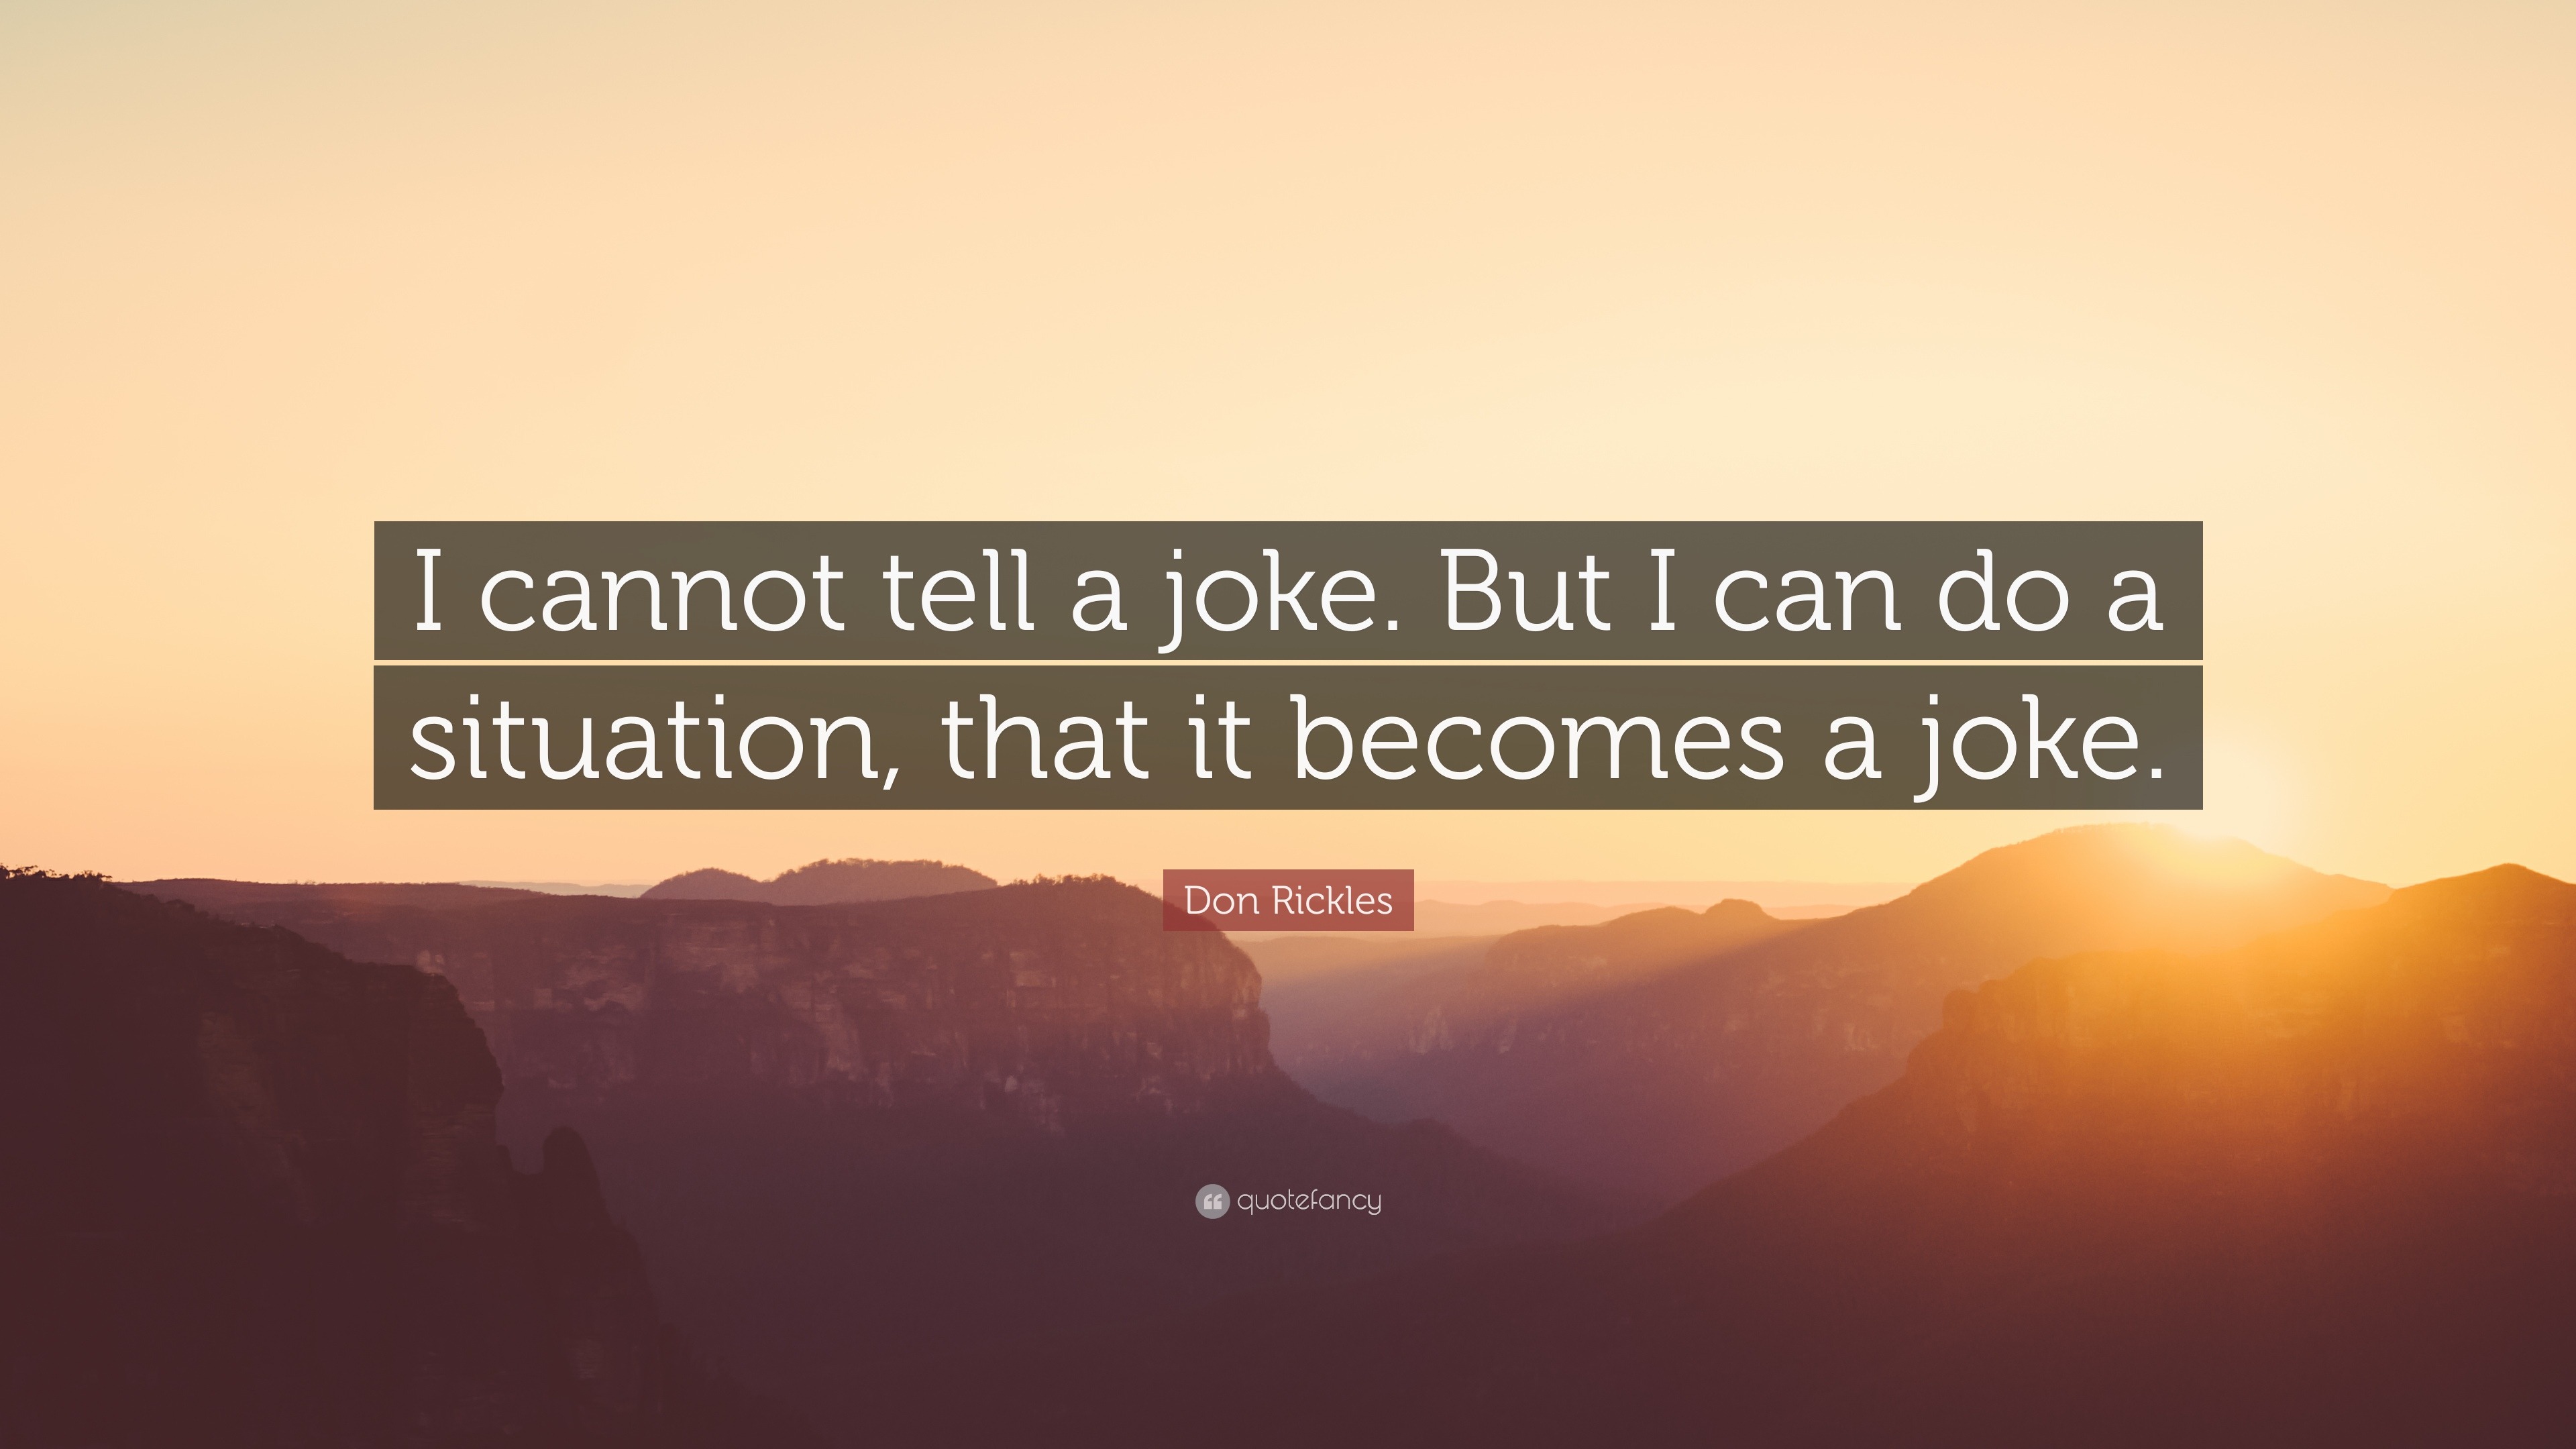 Don Rickles Quote: “I cannot tell a joke. But I can do a situation ...